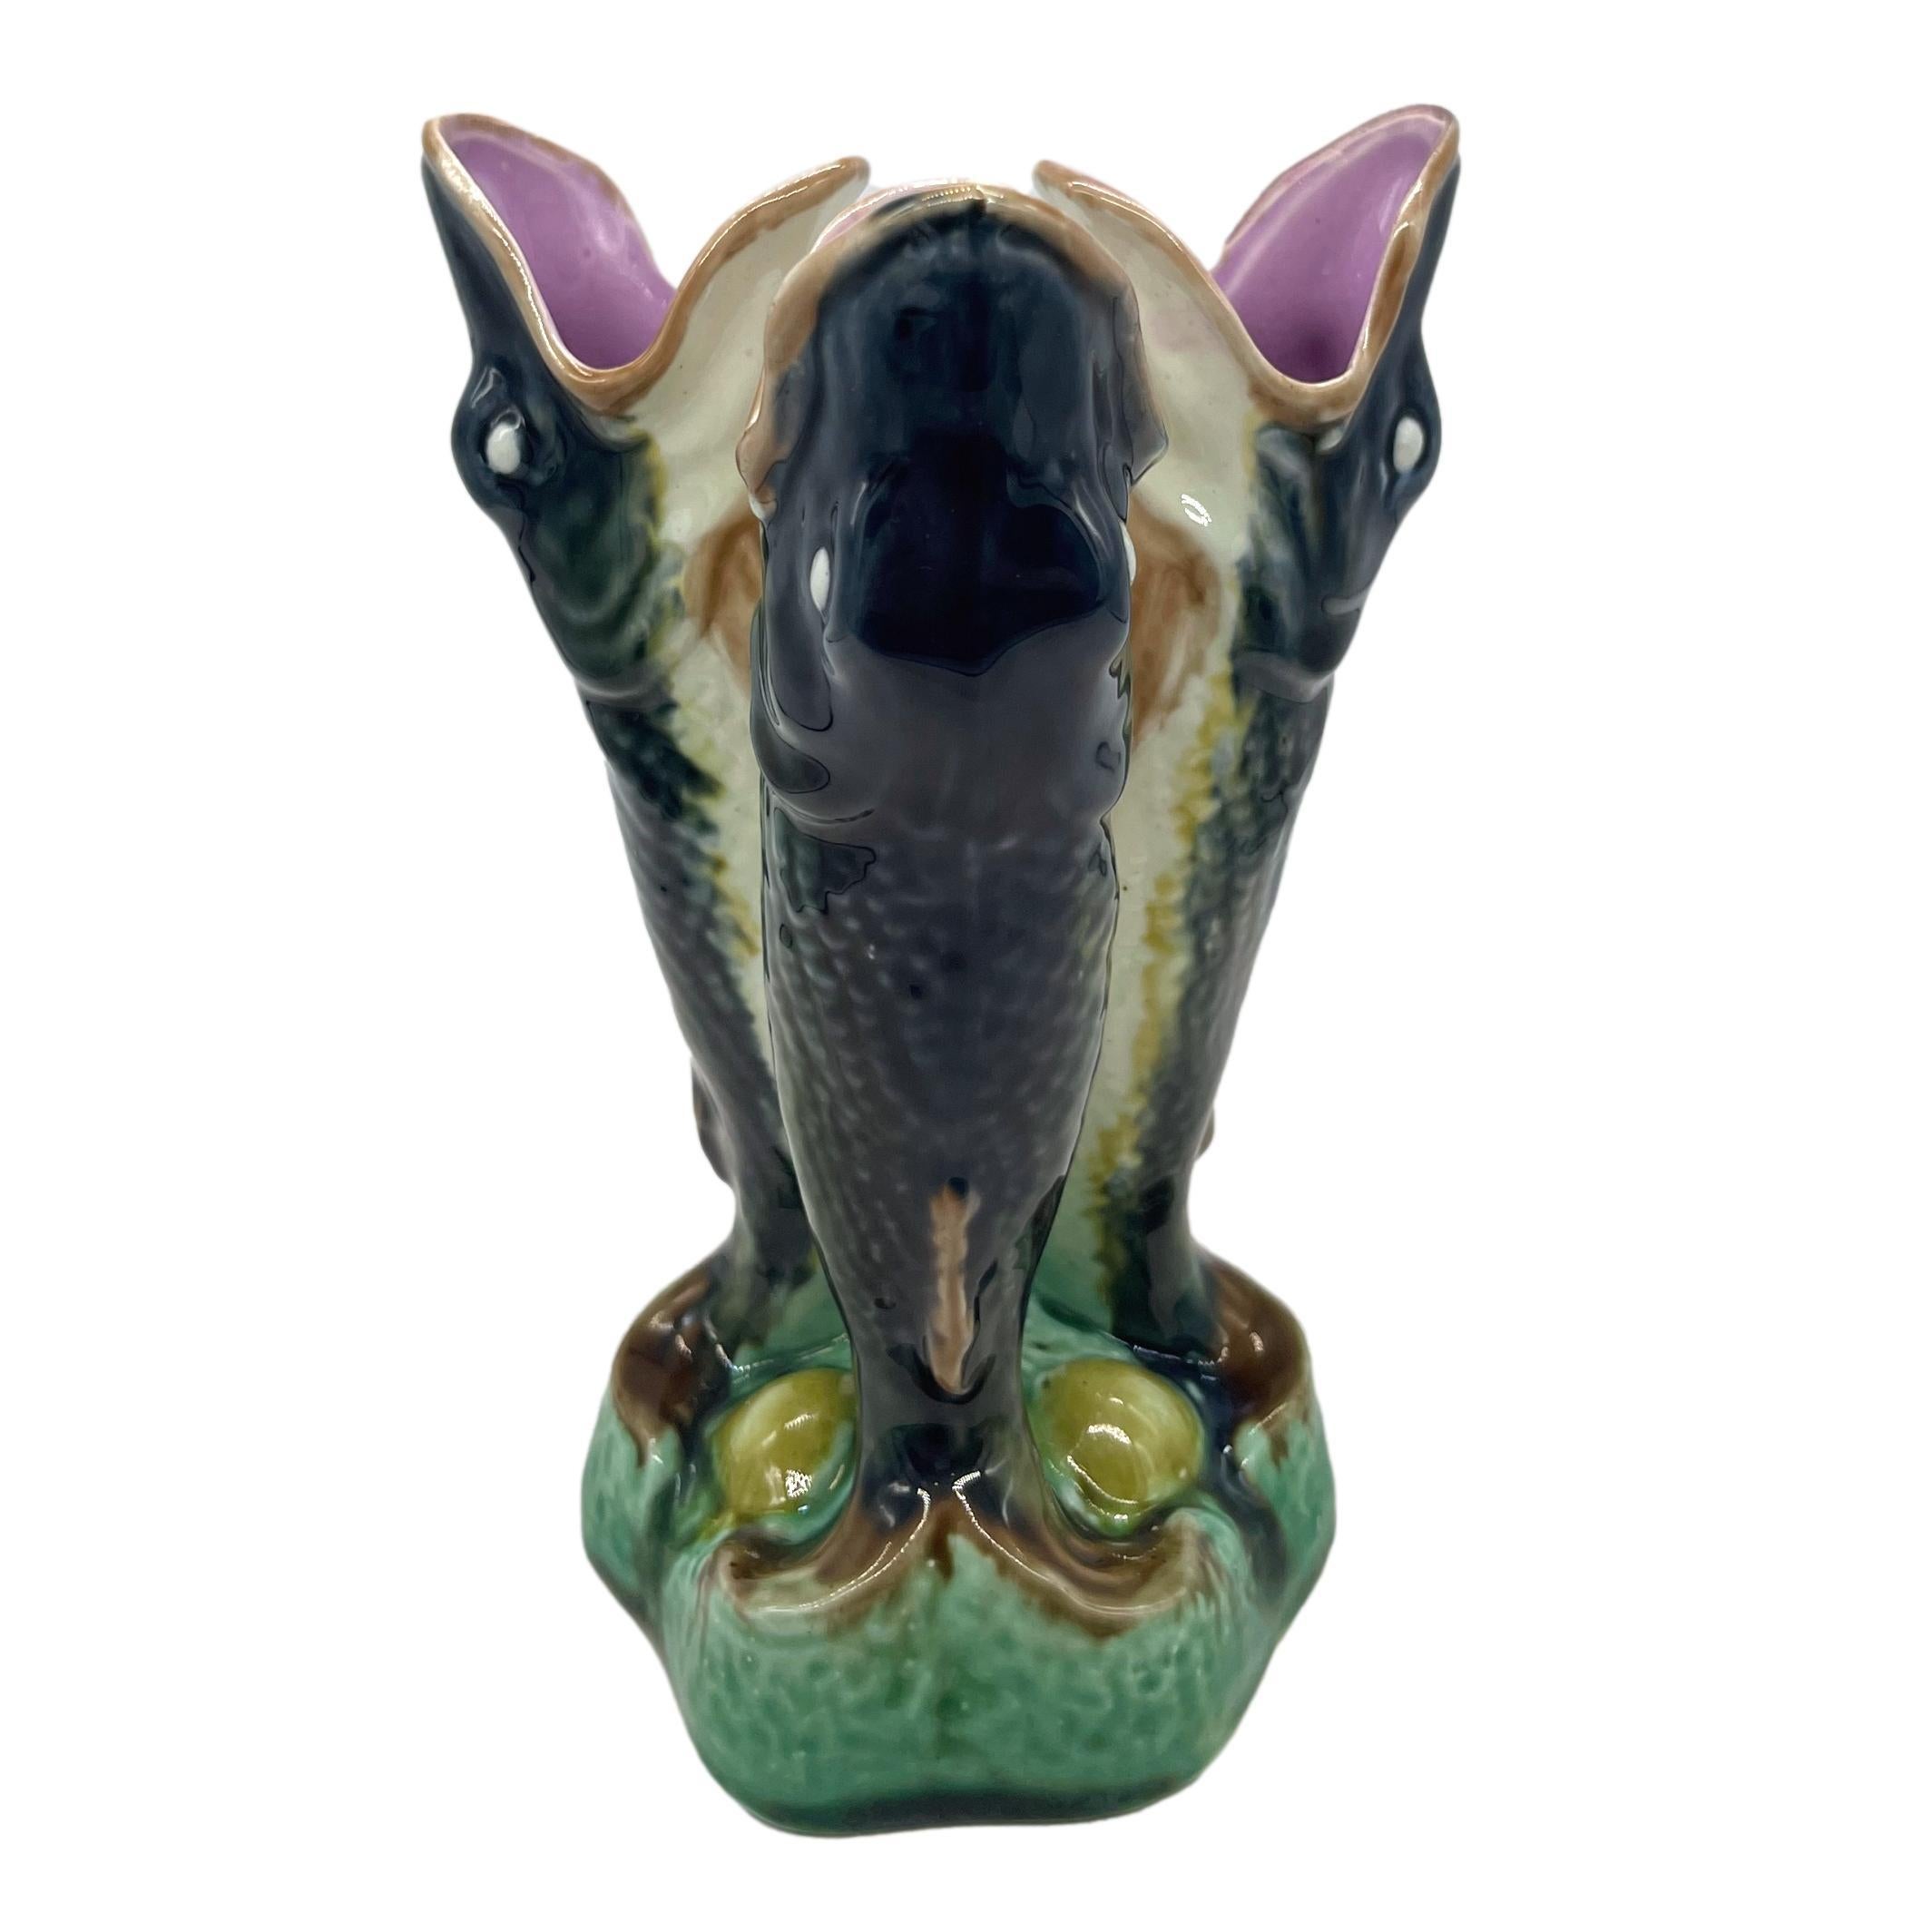 Adams & Bromely Majolica triple posy vase, molded as three interlocked gurgling fish naturalistically glazed with pink interiors, on a mound-form base of shells and seaweed, the yellow glazed reverse with impressed design number, '44' and partially